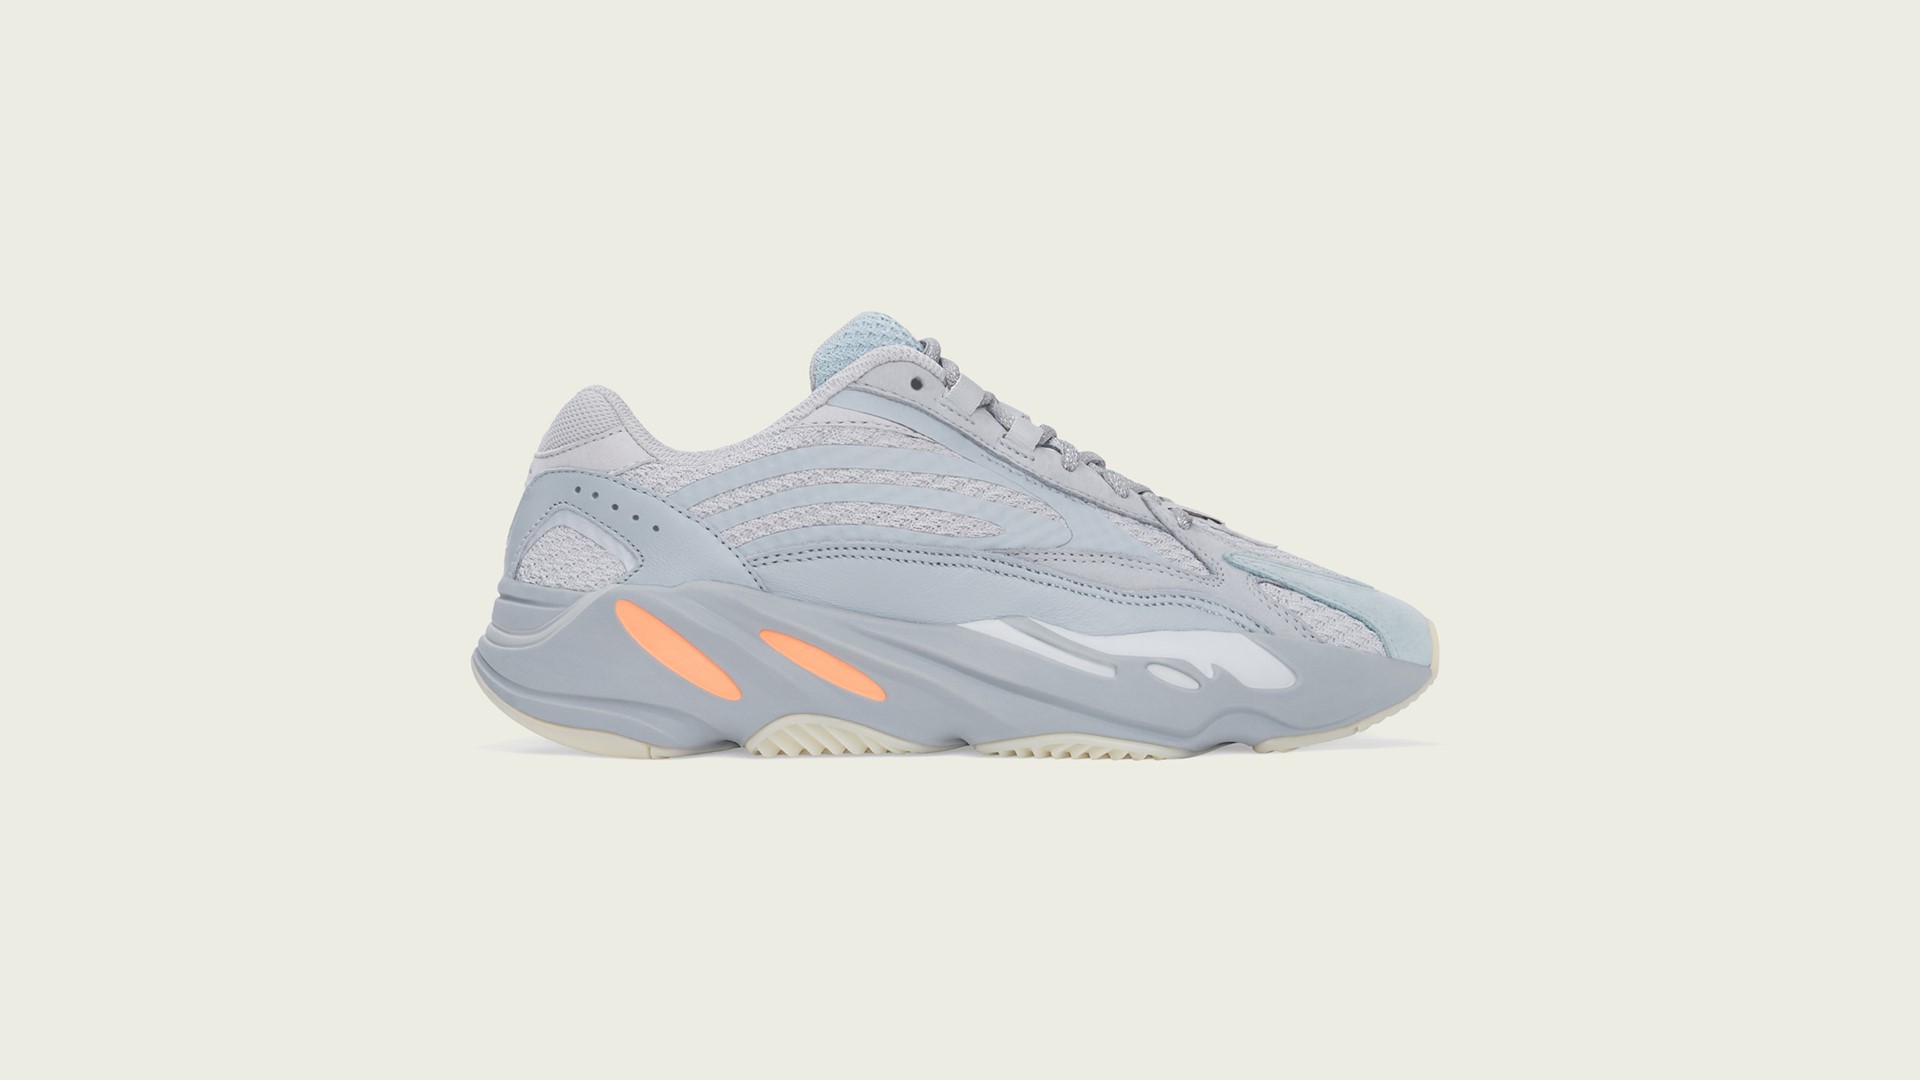 adidas + KANYE WEST announce the YEEZY BOOST 700 V2 Inertia